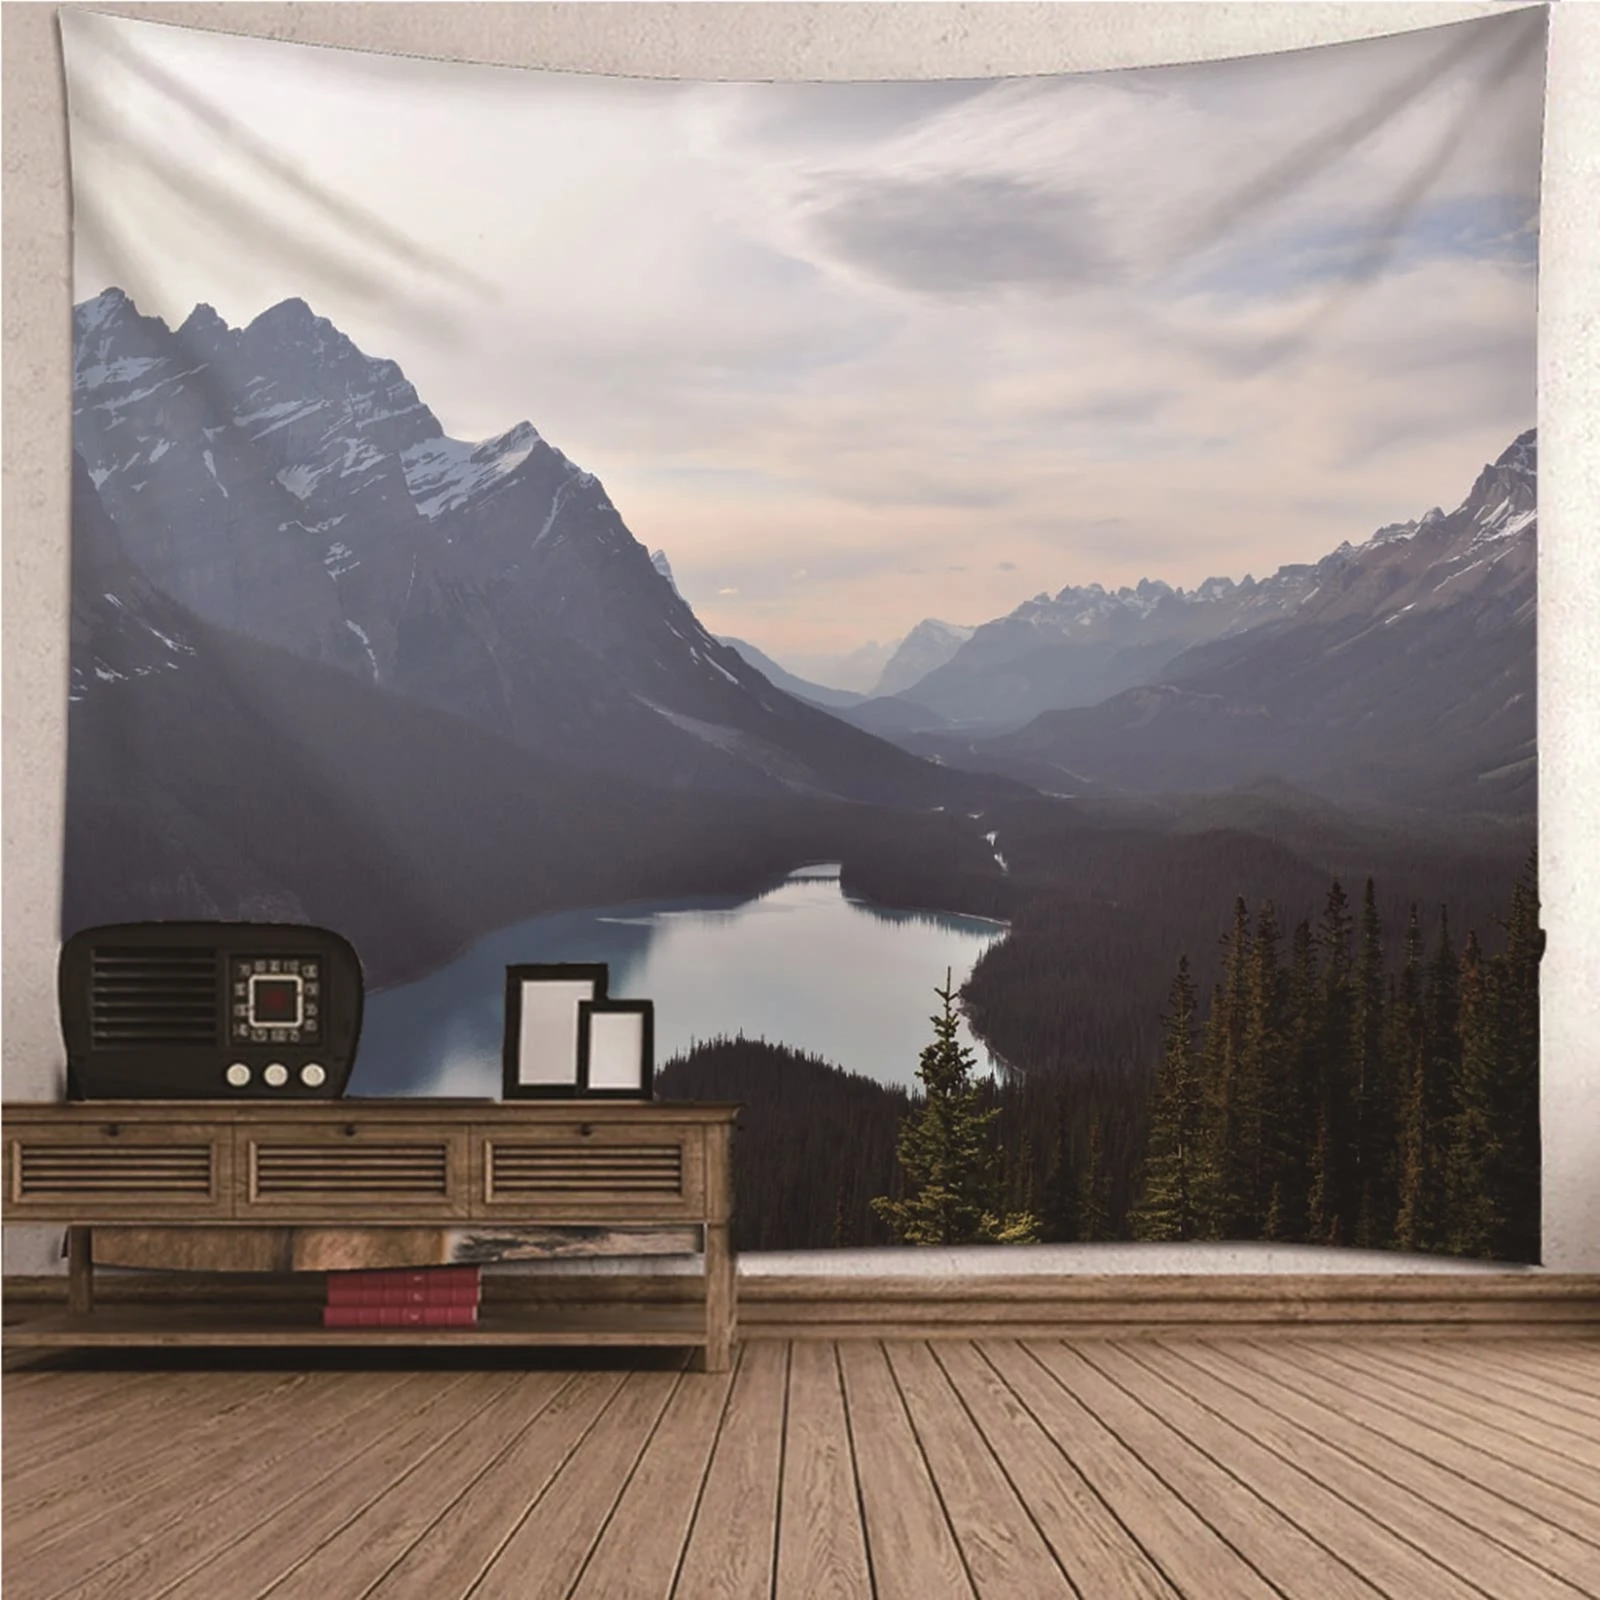 

Tapestry Large Tapestries For Bedroom natural scenery High Mountains & River Wall Hanging Blanket Dorm Art Decor Covering